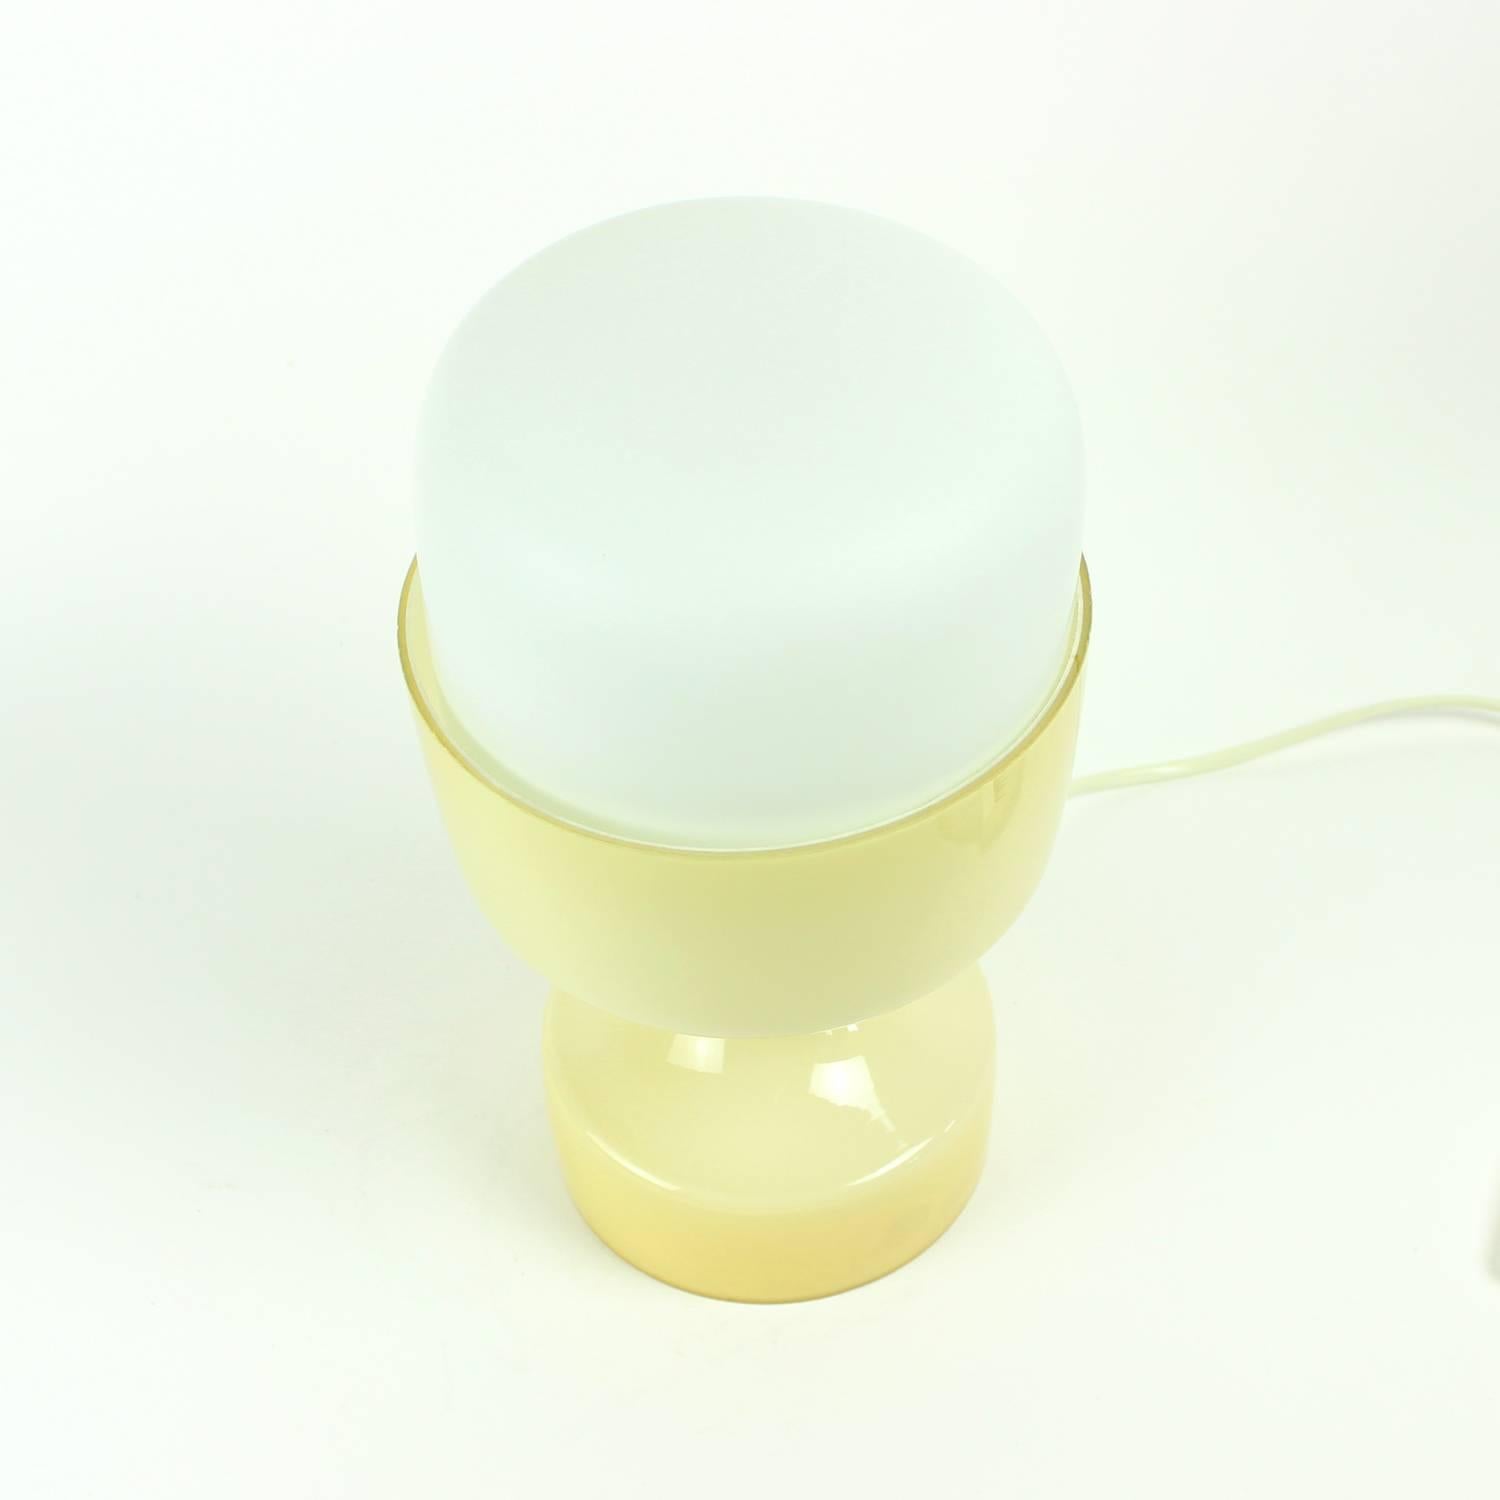 Mid-Century Modern White & Cream Opaline Glass Table Lamp by Ivan Jakes, Czechoslovakia, circa 1970 For Sale